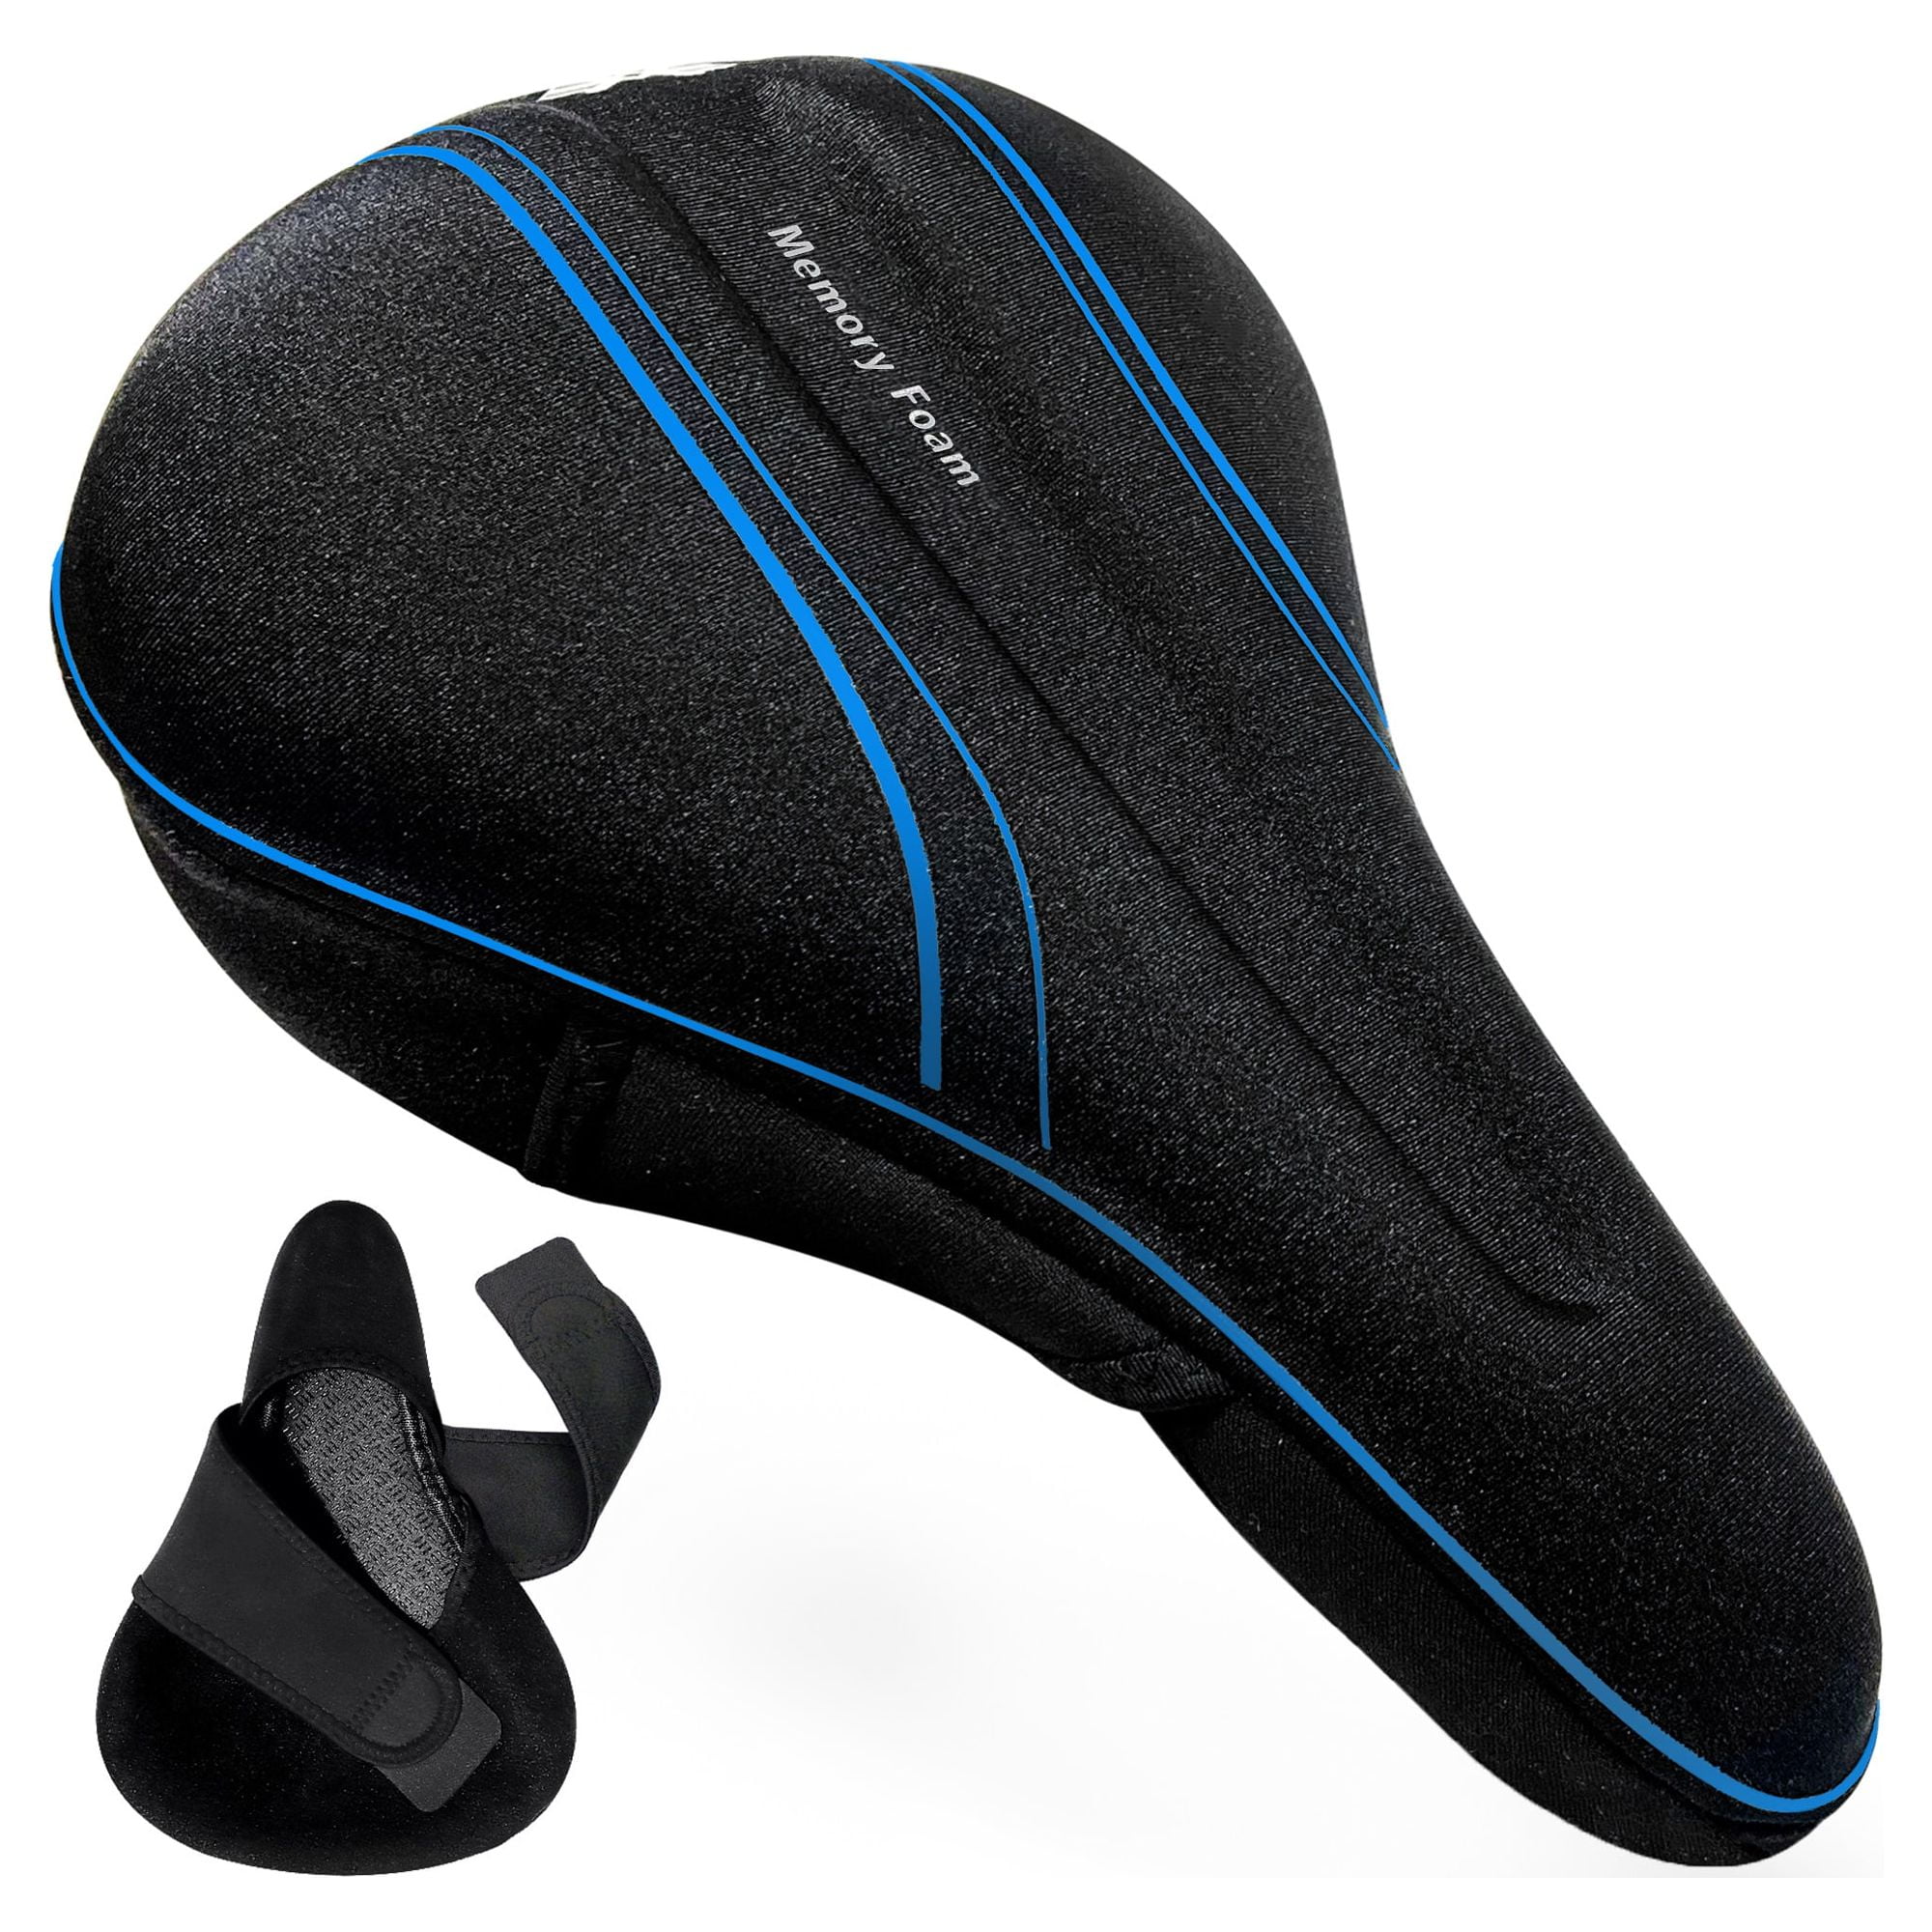 Bike Seat Cushion, Wide Gel Soft Pad Exercise Bike Seat Cover, Wide Foam  Bicycle Sea - Bicycle Accessories, Facebook Marketplace